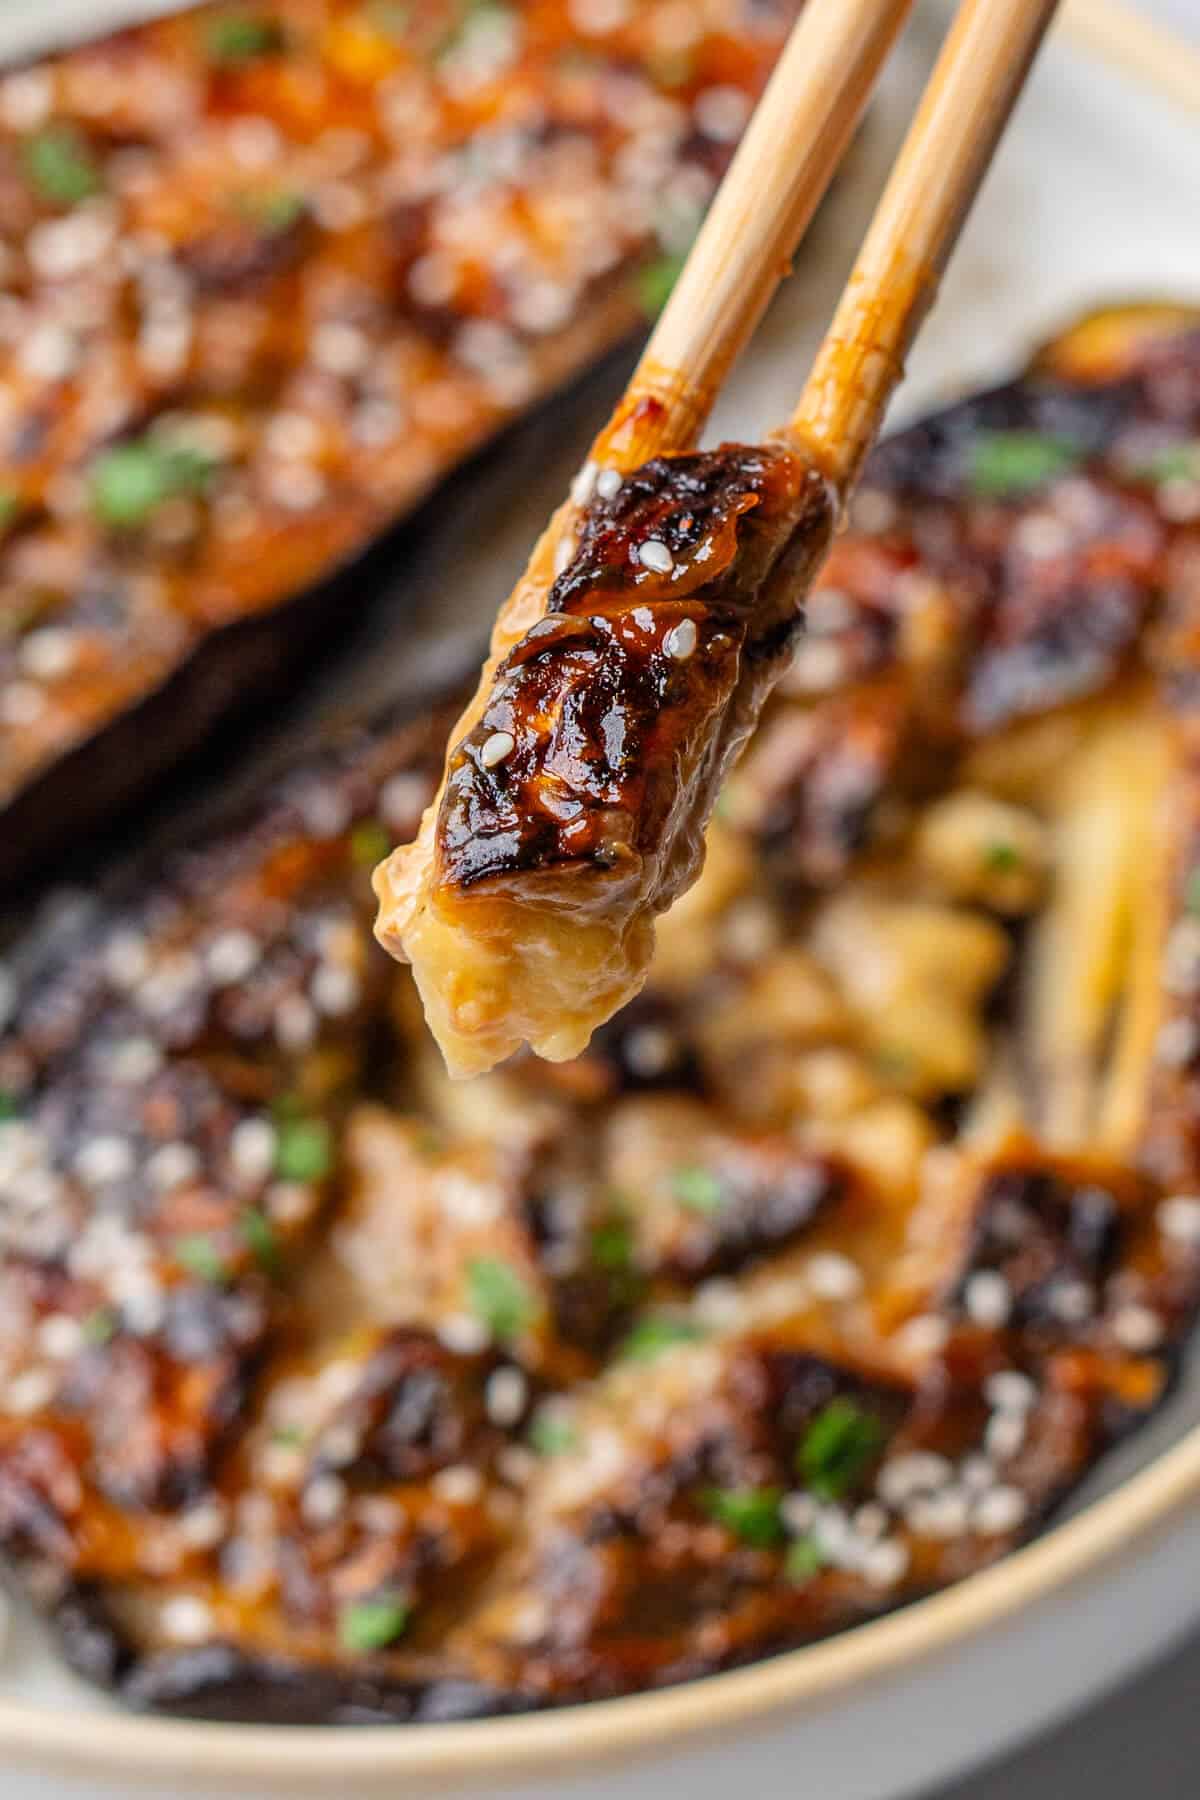 Close up of piece of eggplant in chopsticks